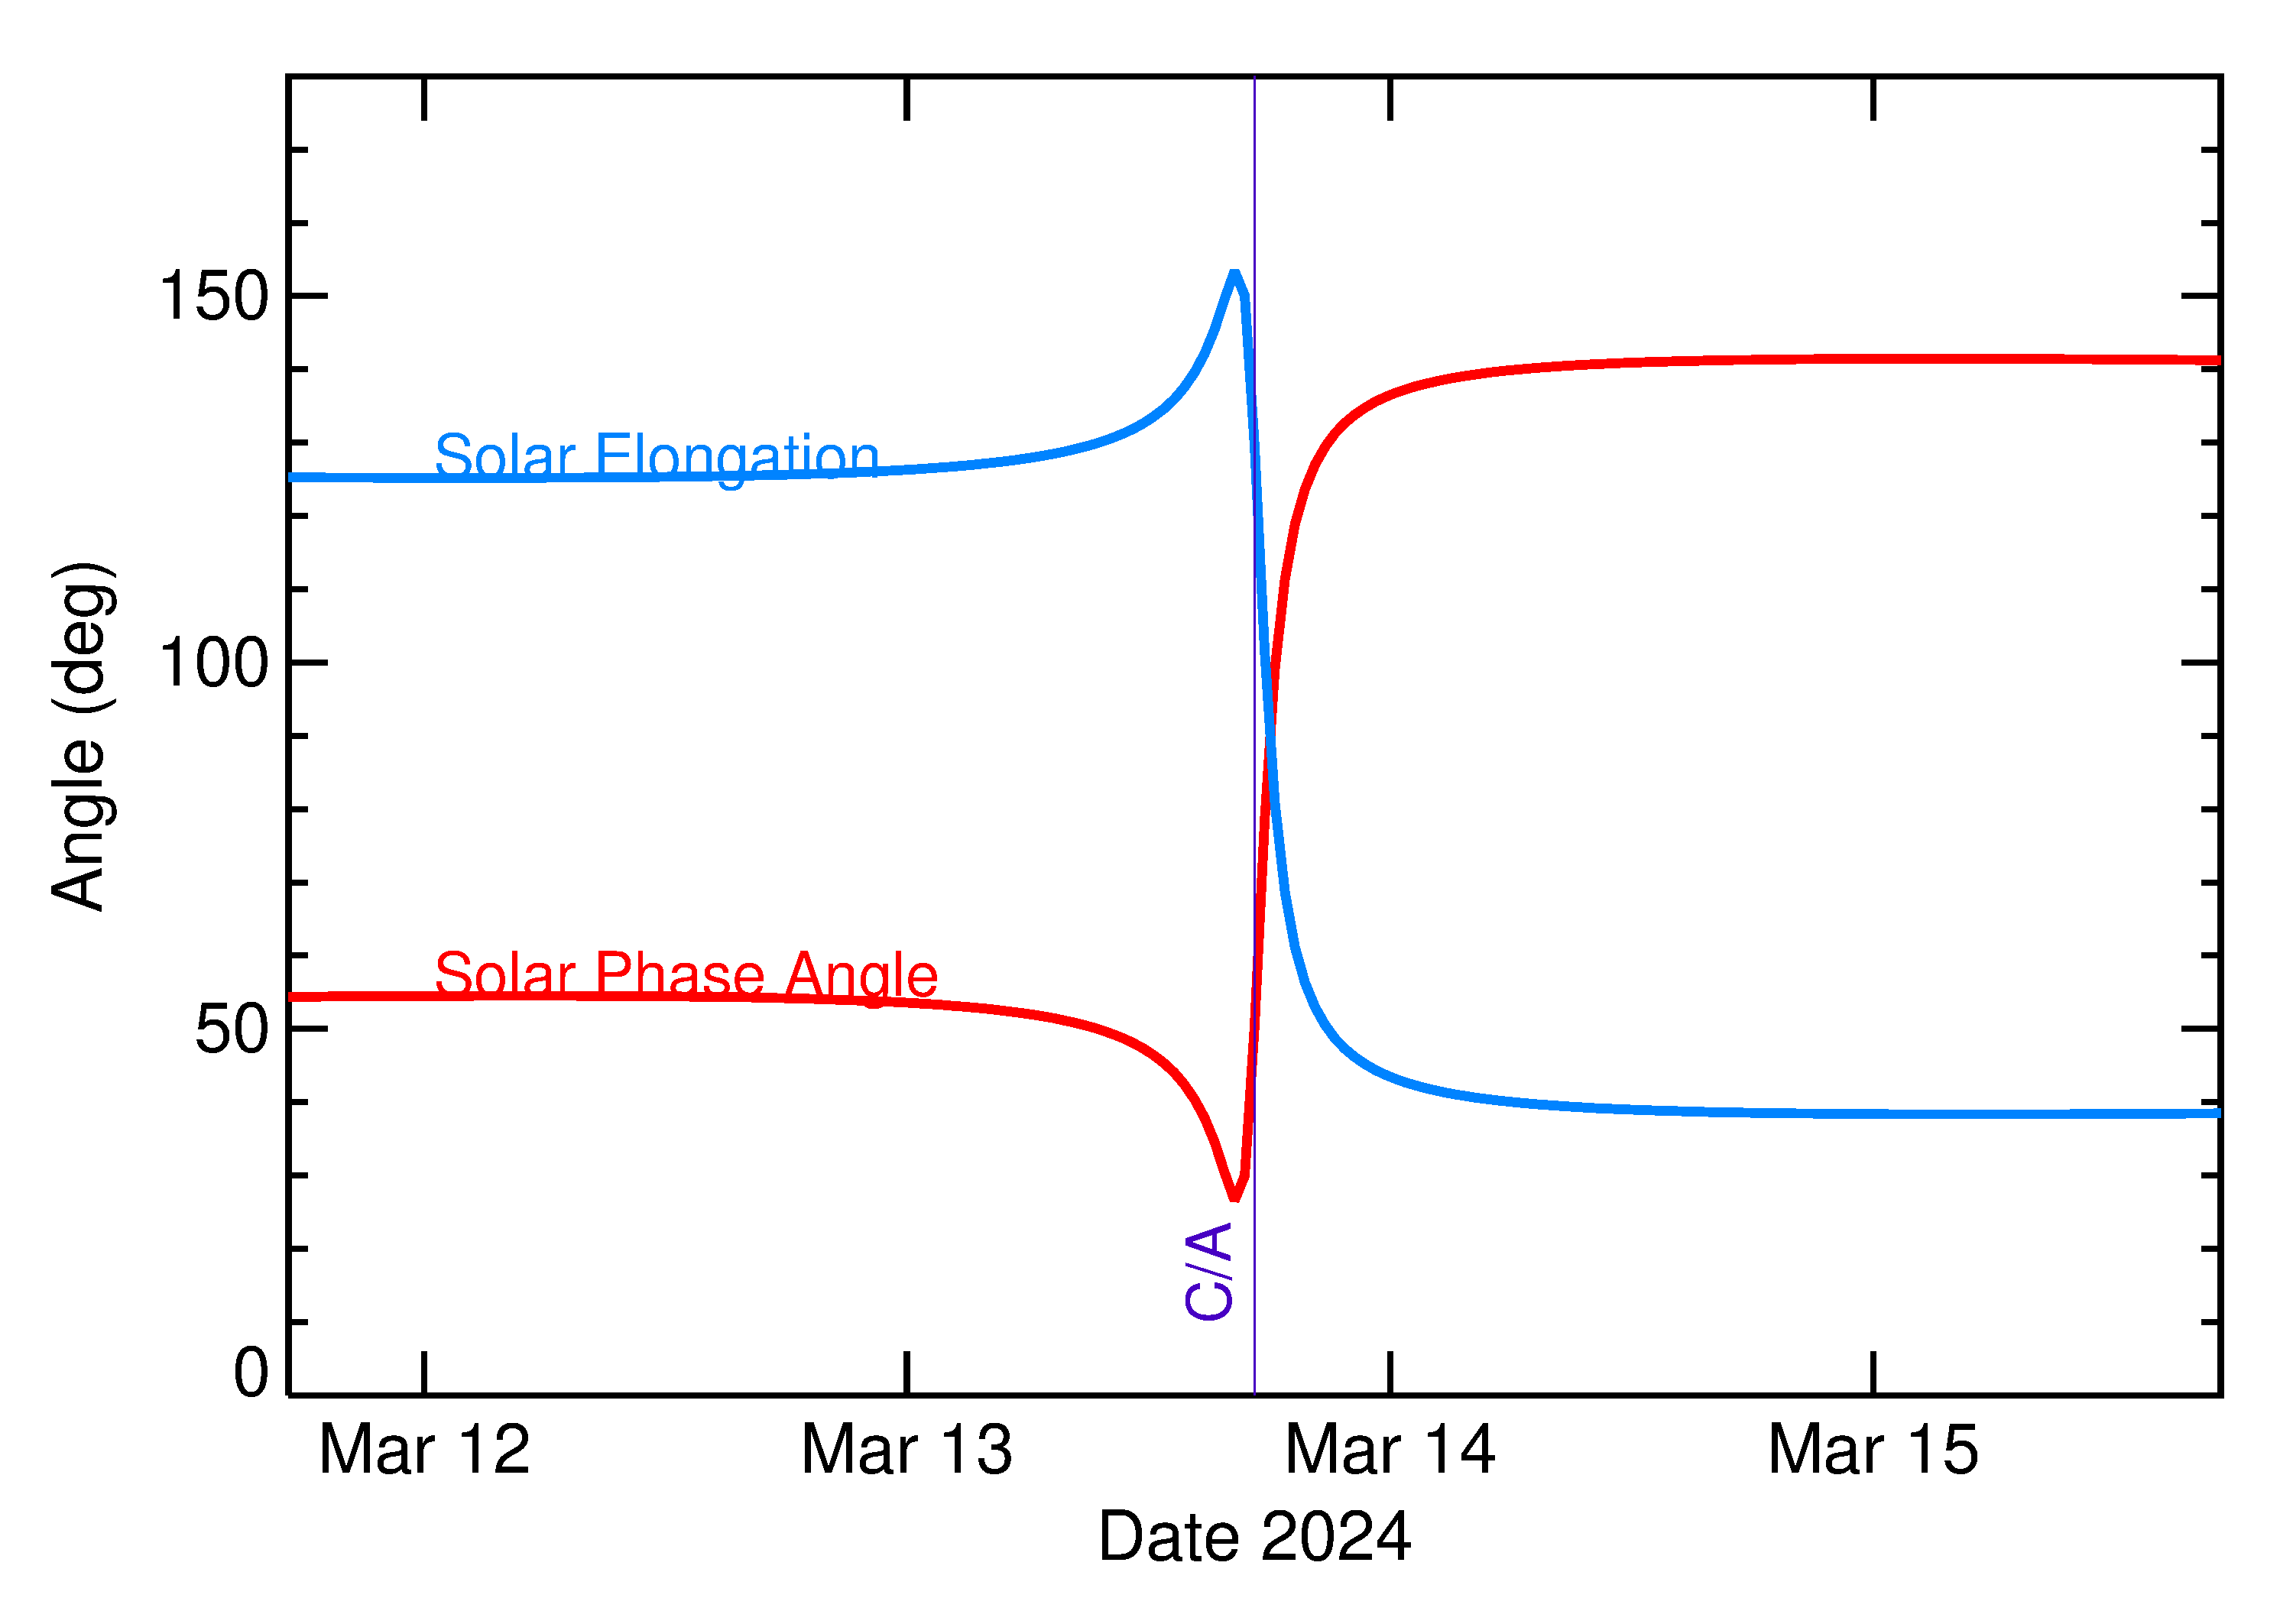 Solar Elongation and Solar Phase Angle of 2024 EJ4 in the days around closest approach